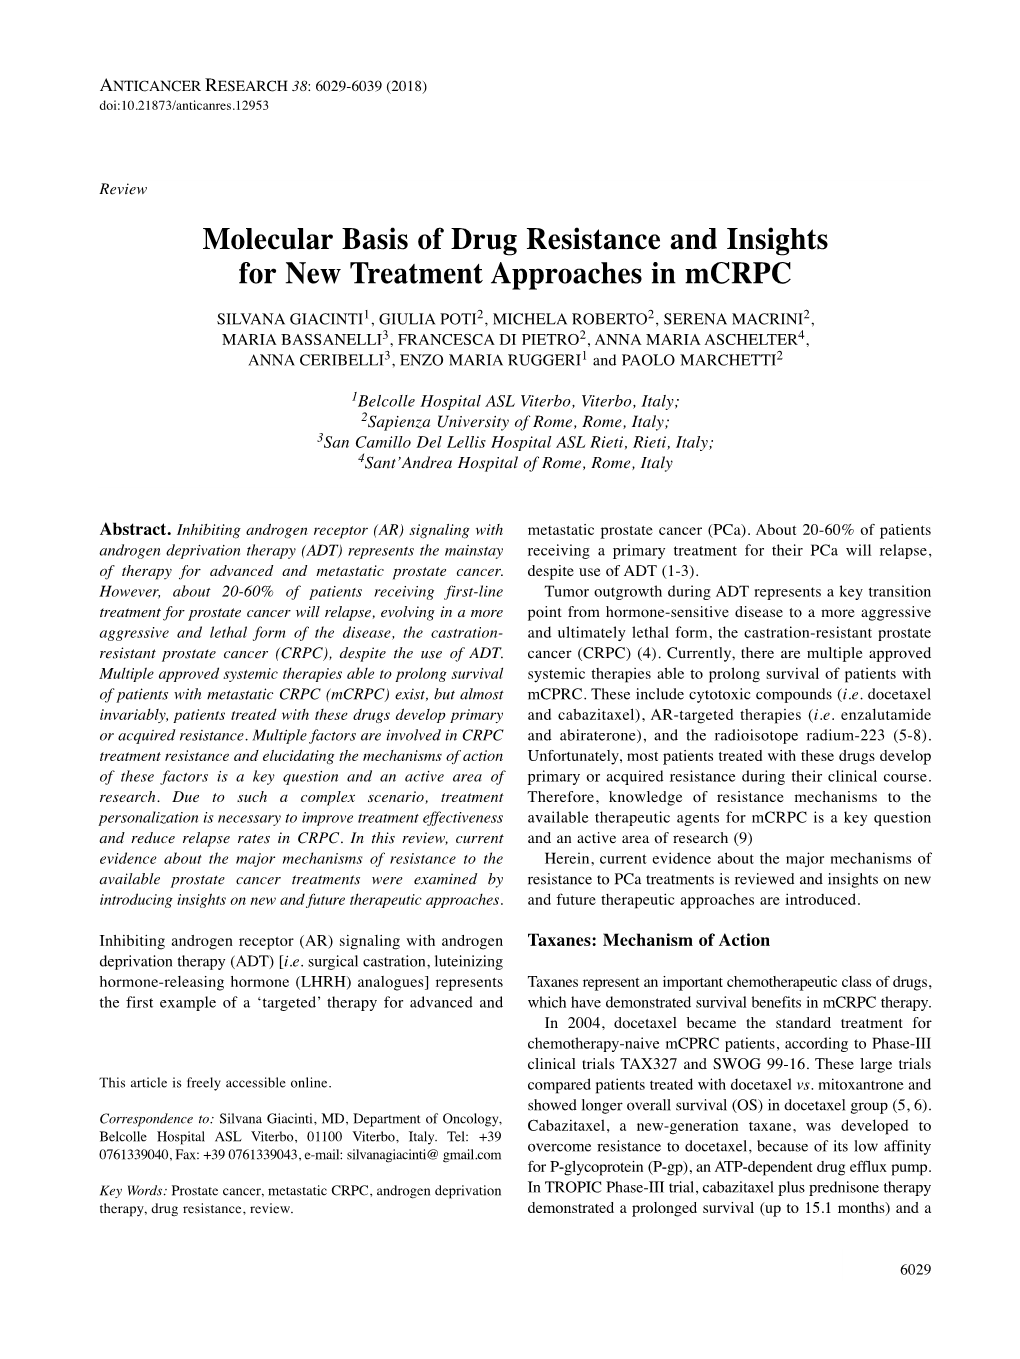 Molecular Basis of Drug Resistance and Insights for New Treatment